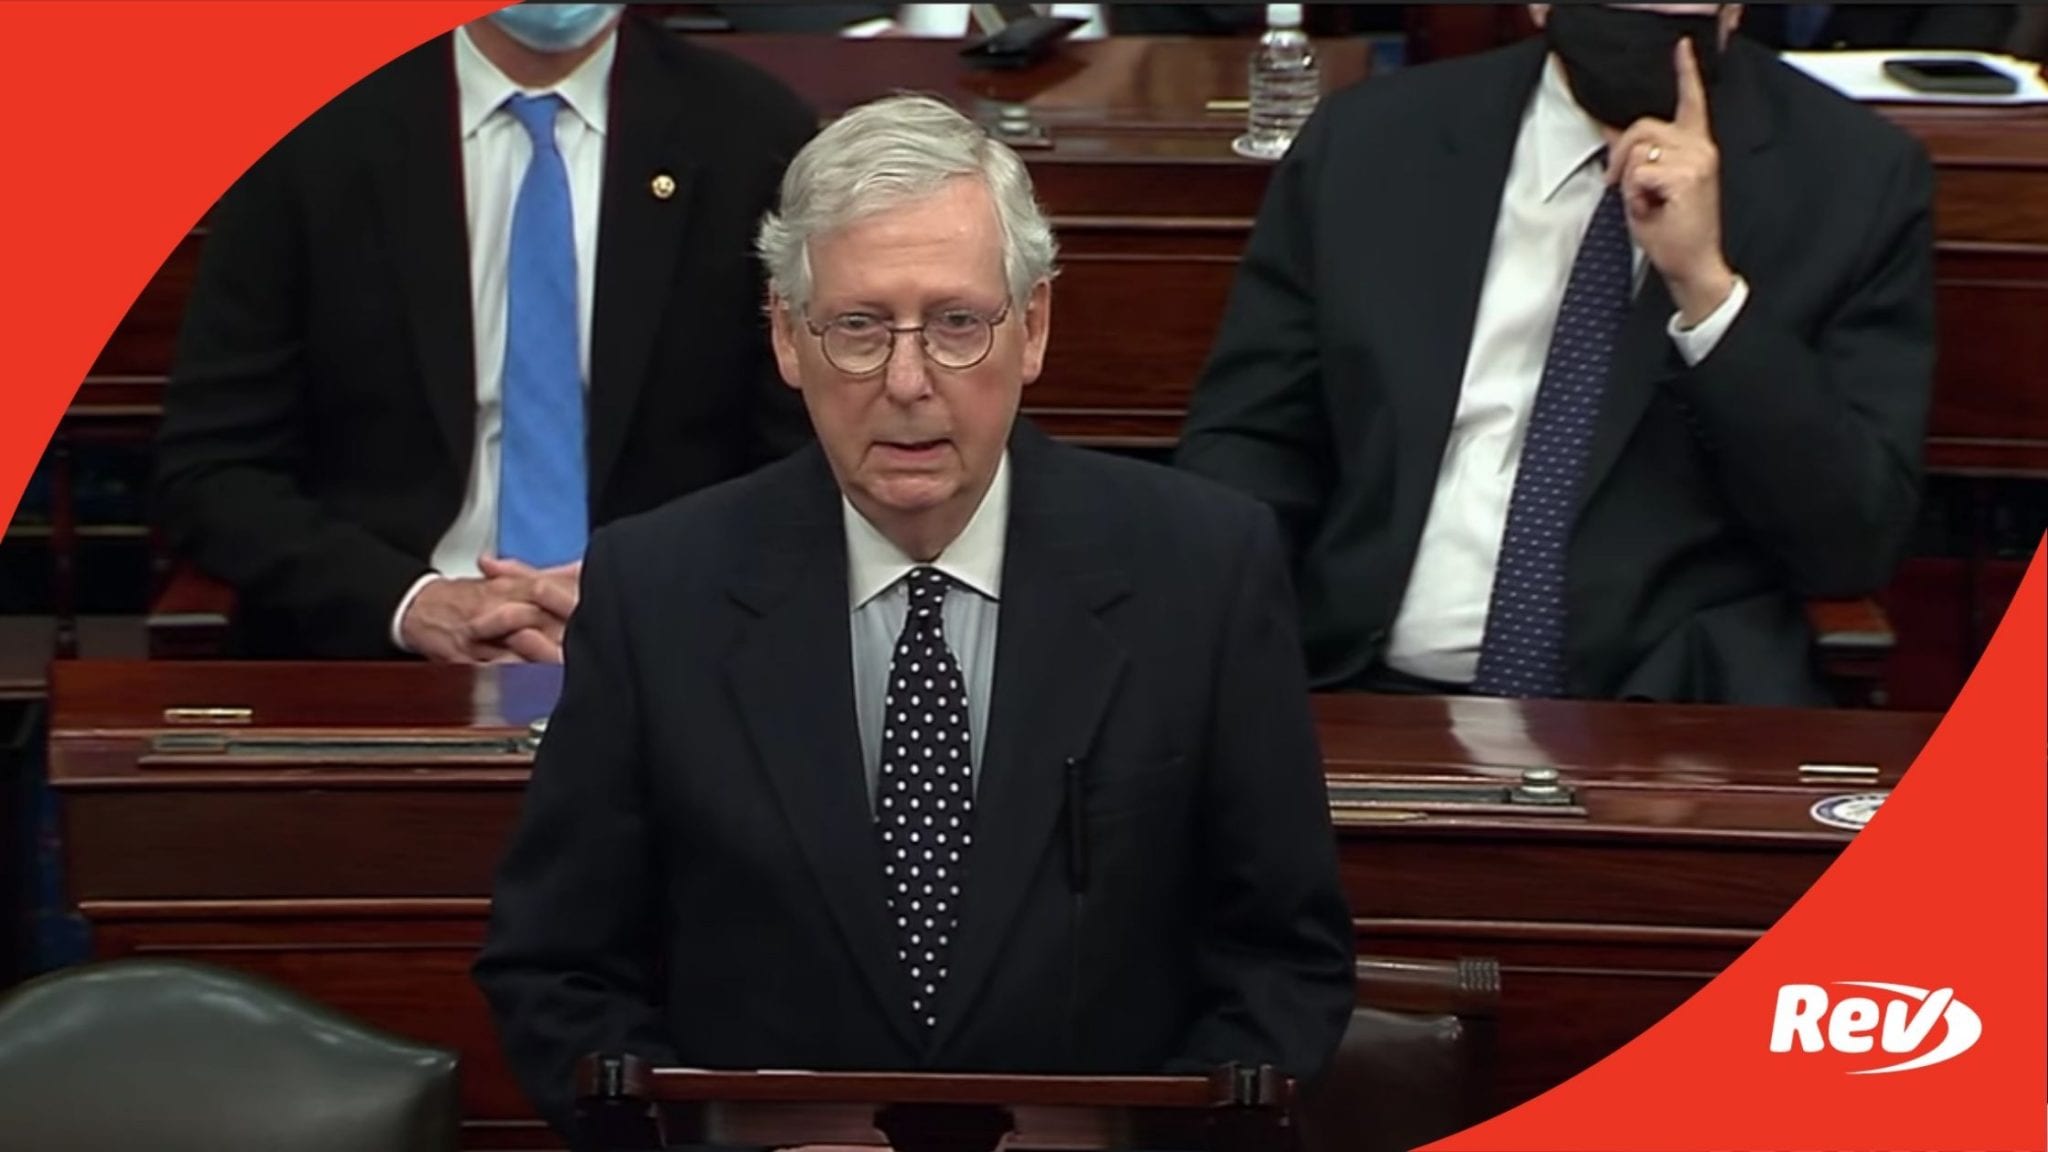 Mitch McConnell Senate Speech Transcript January 6: Rejects Efforts to Overturn Presidential Election Results